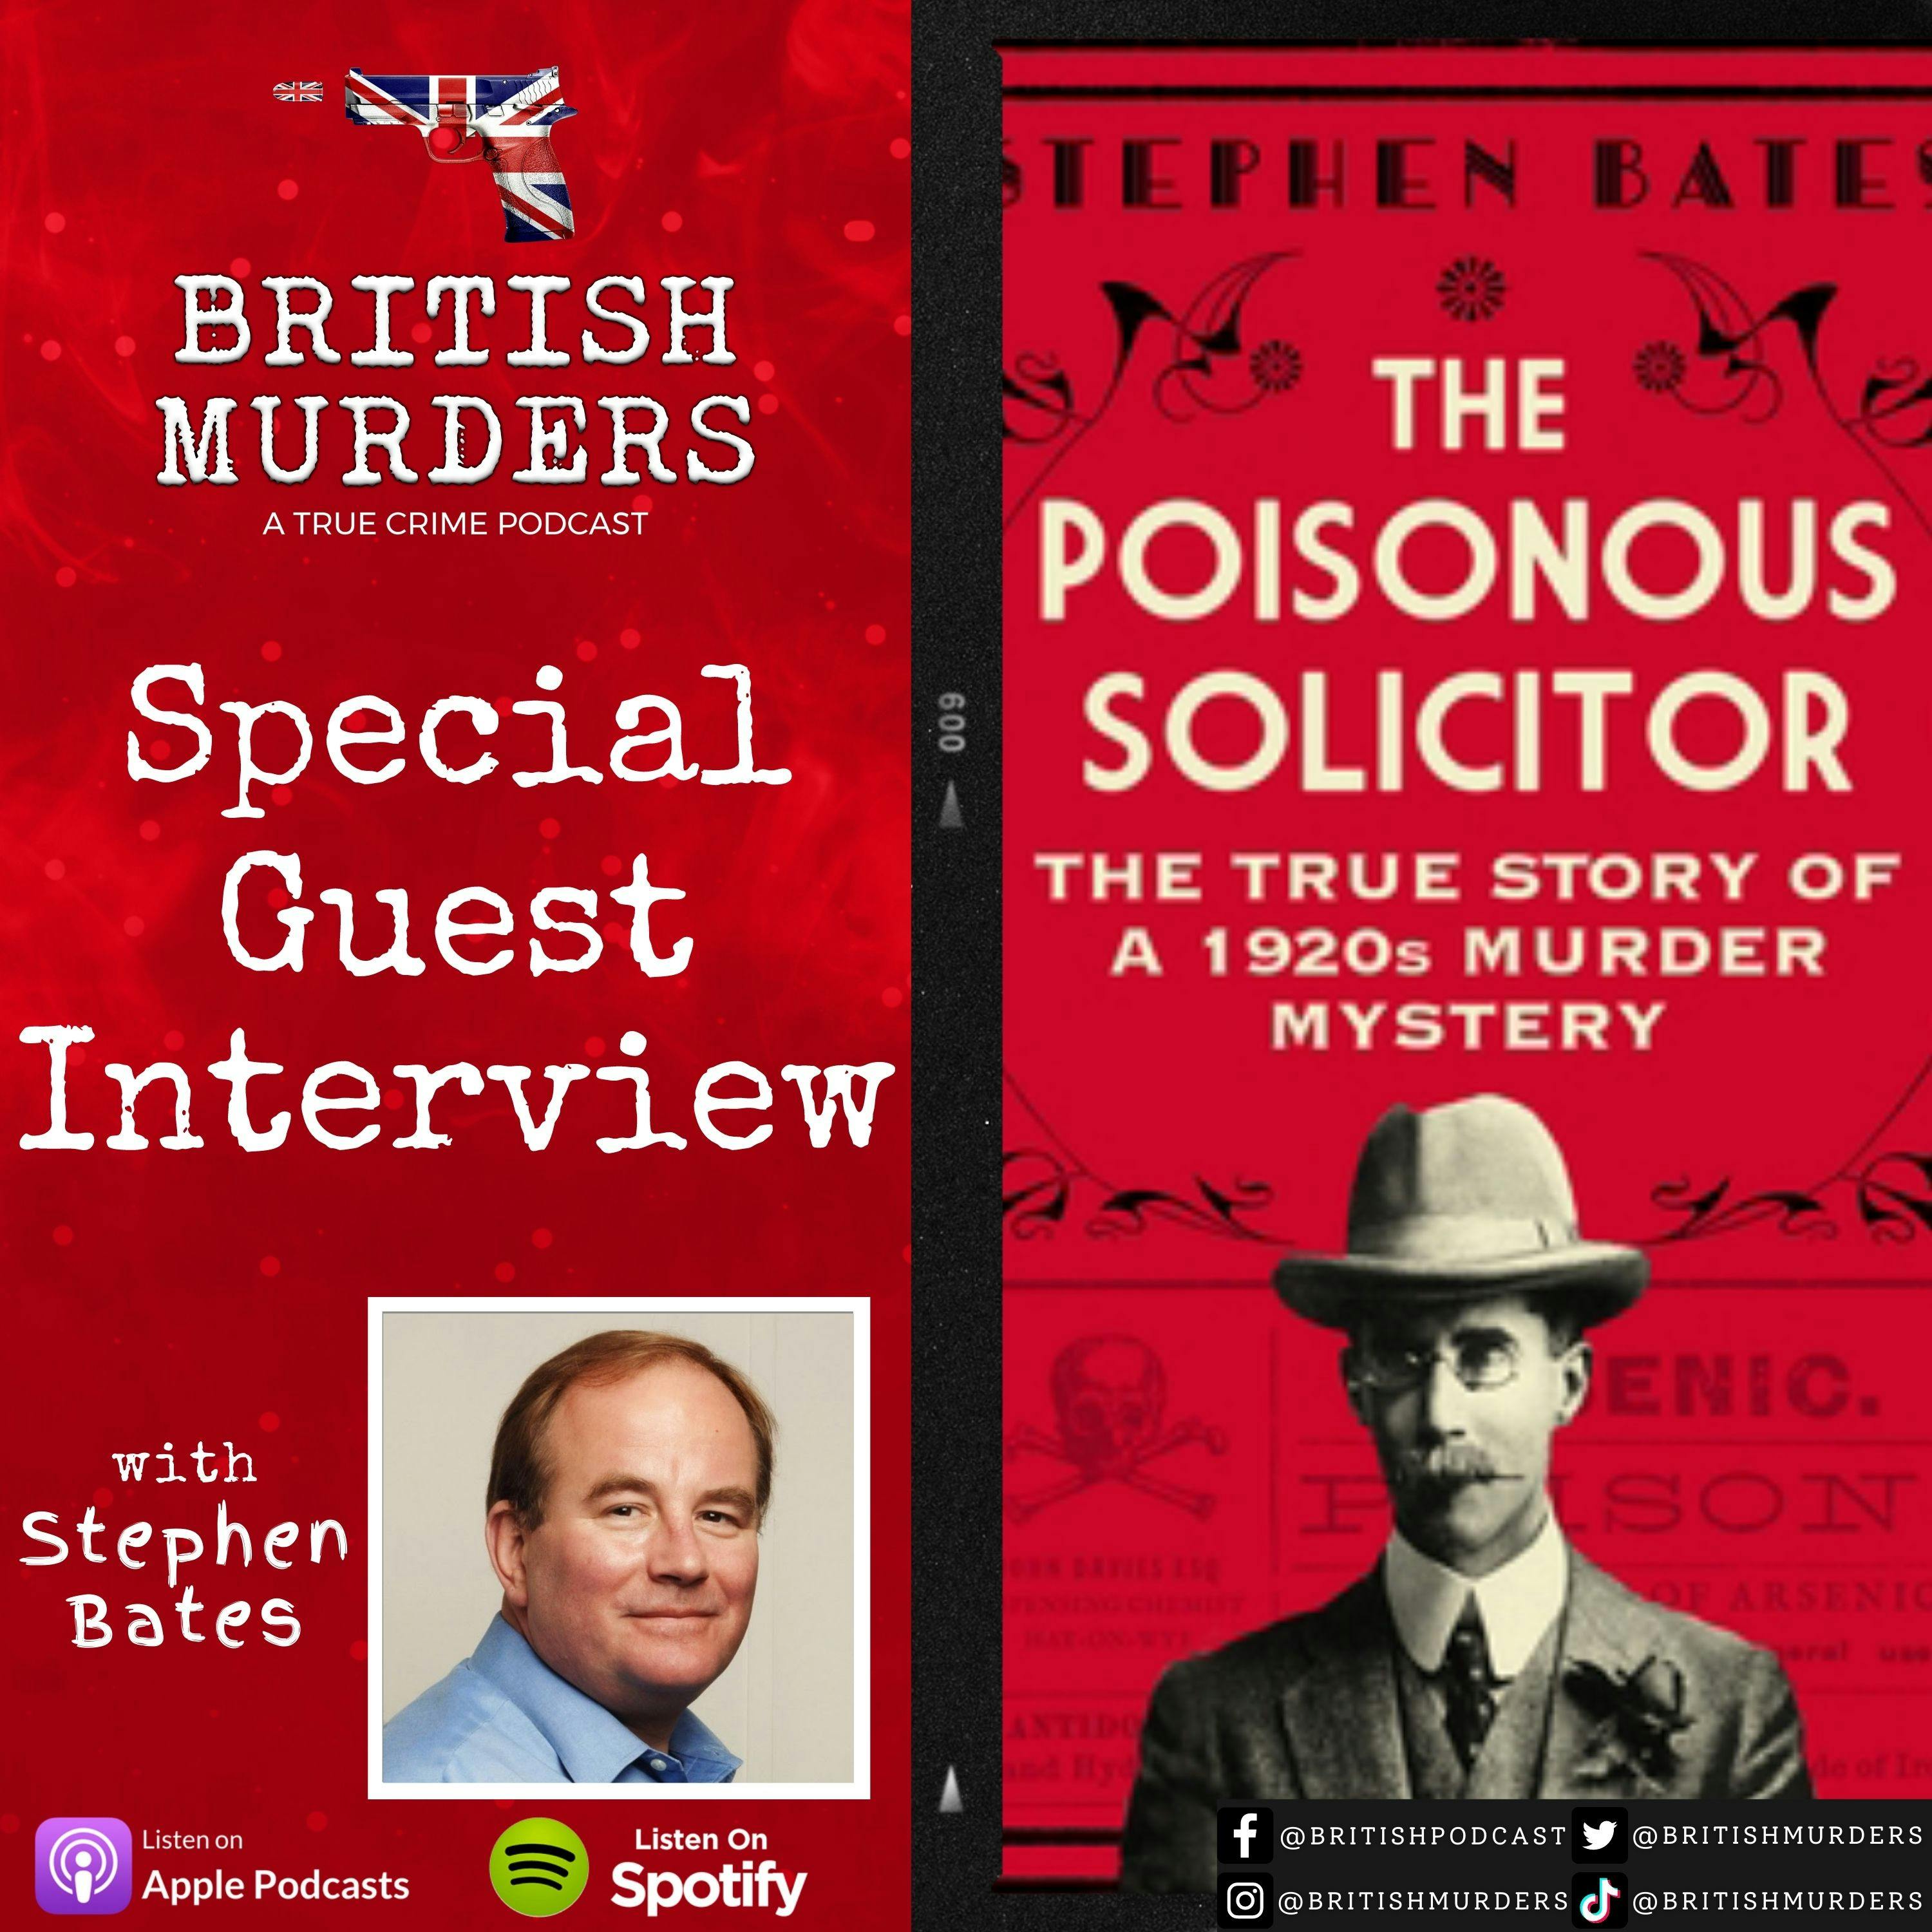 "The Poisonous Solicitor" Major Herbert Armstrong with Stephen Bates (Writer and Award-Winning Journalist) Image